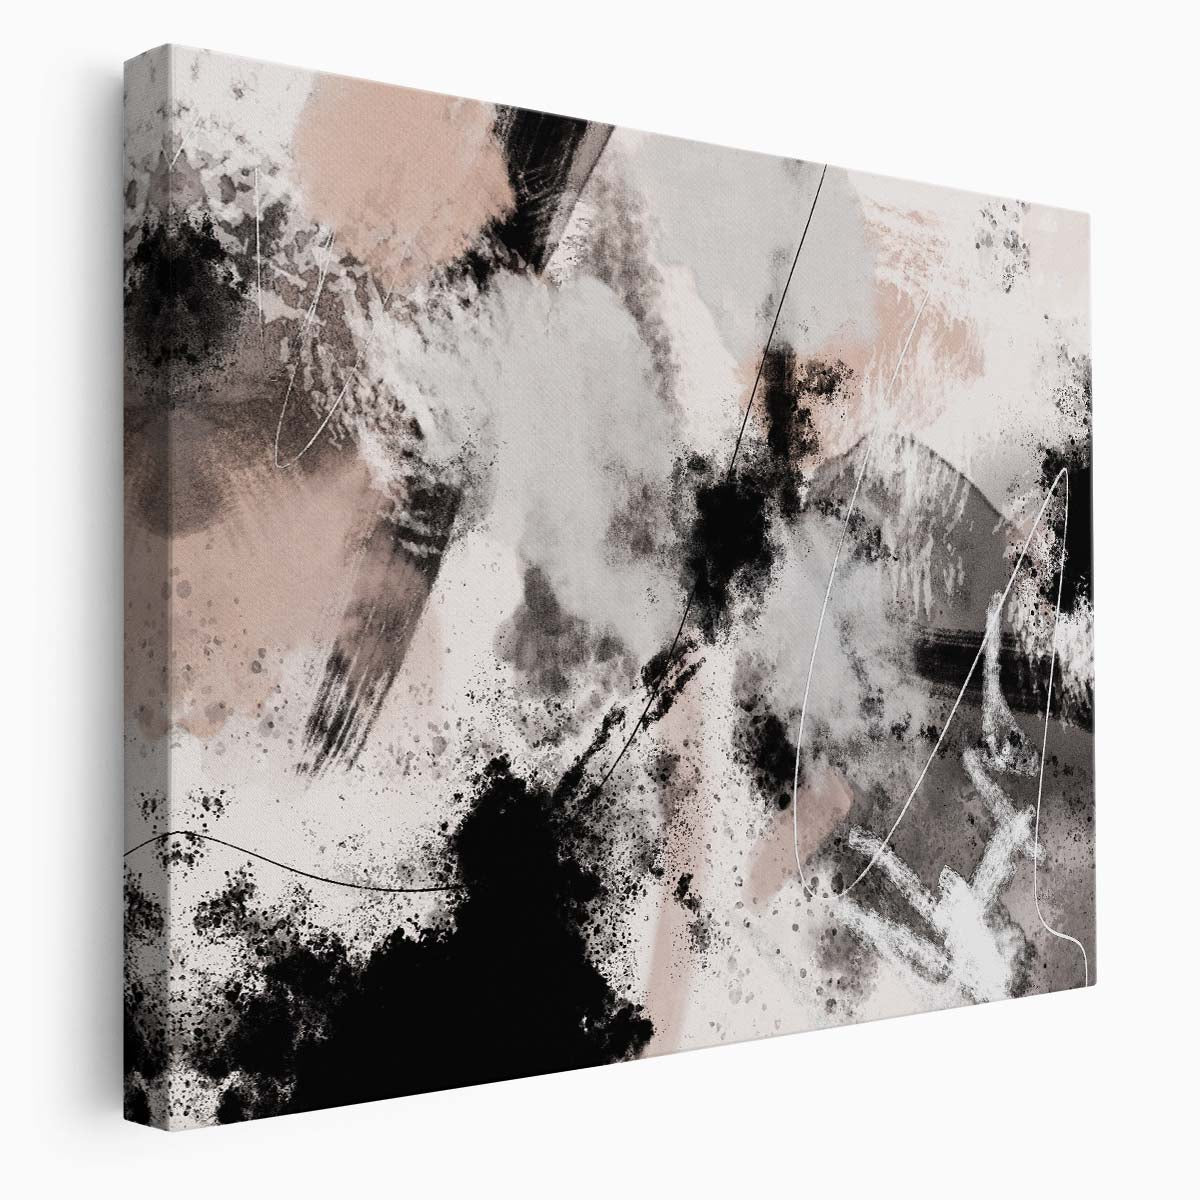 Color Splash Abstract Geometric Canvas Painting Wall Art by Luxuriance Designs. Made in USA.